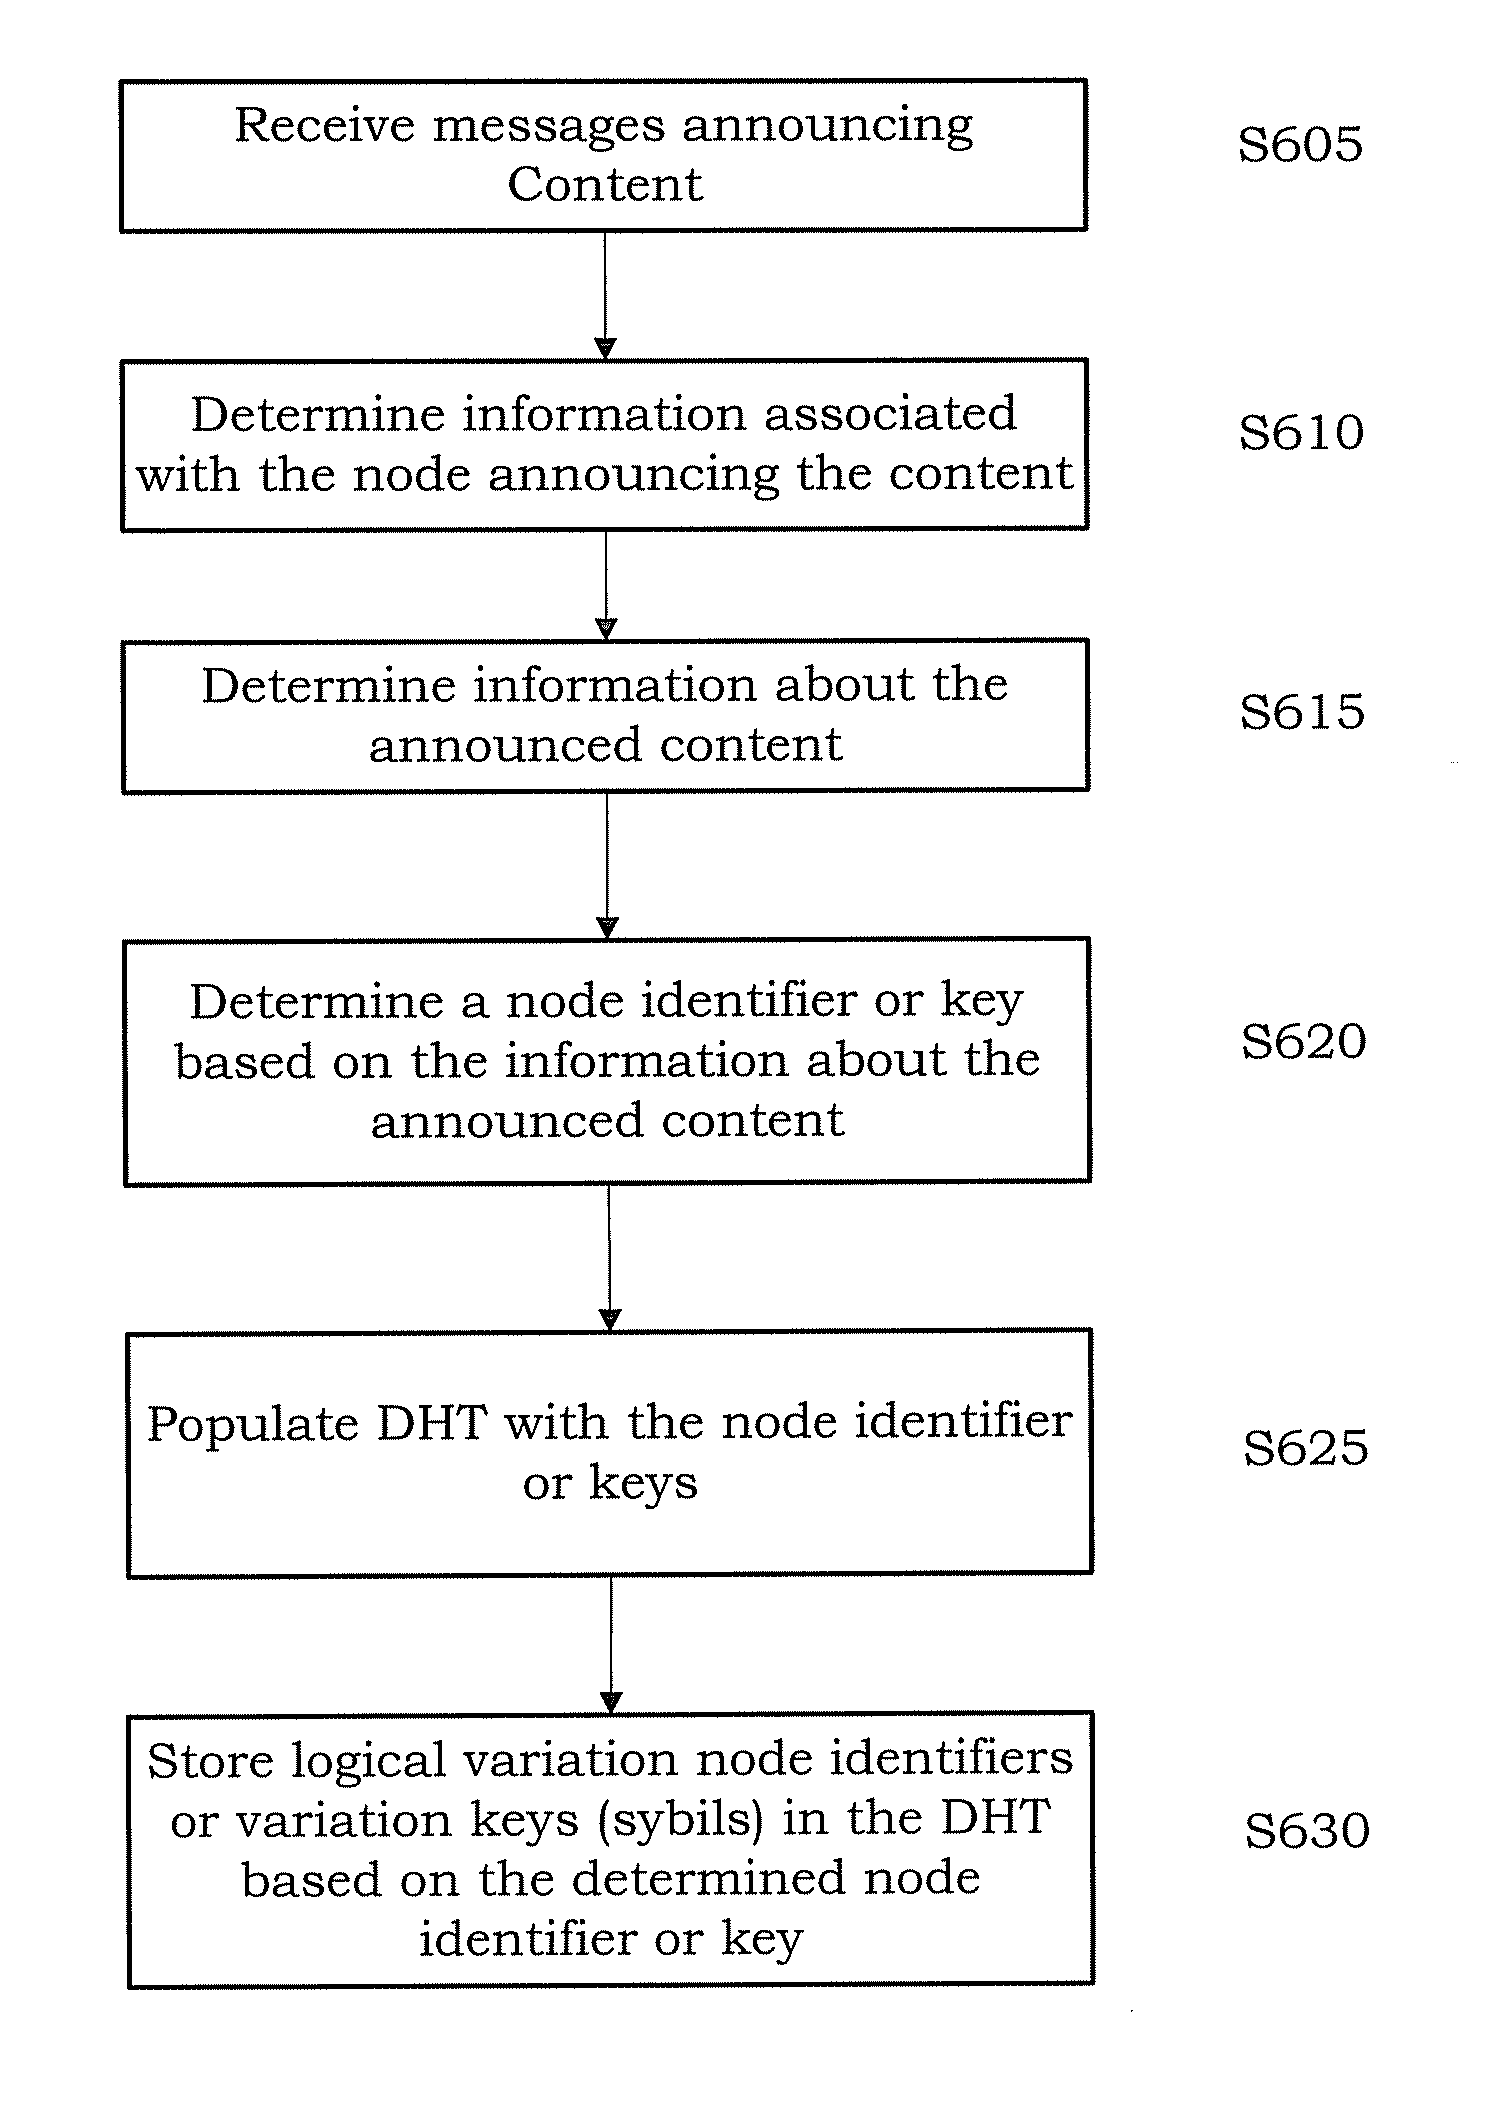 Peer to peer localization for content in a distributed hash table